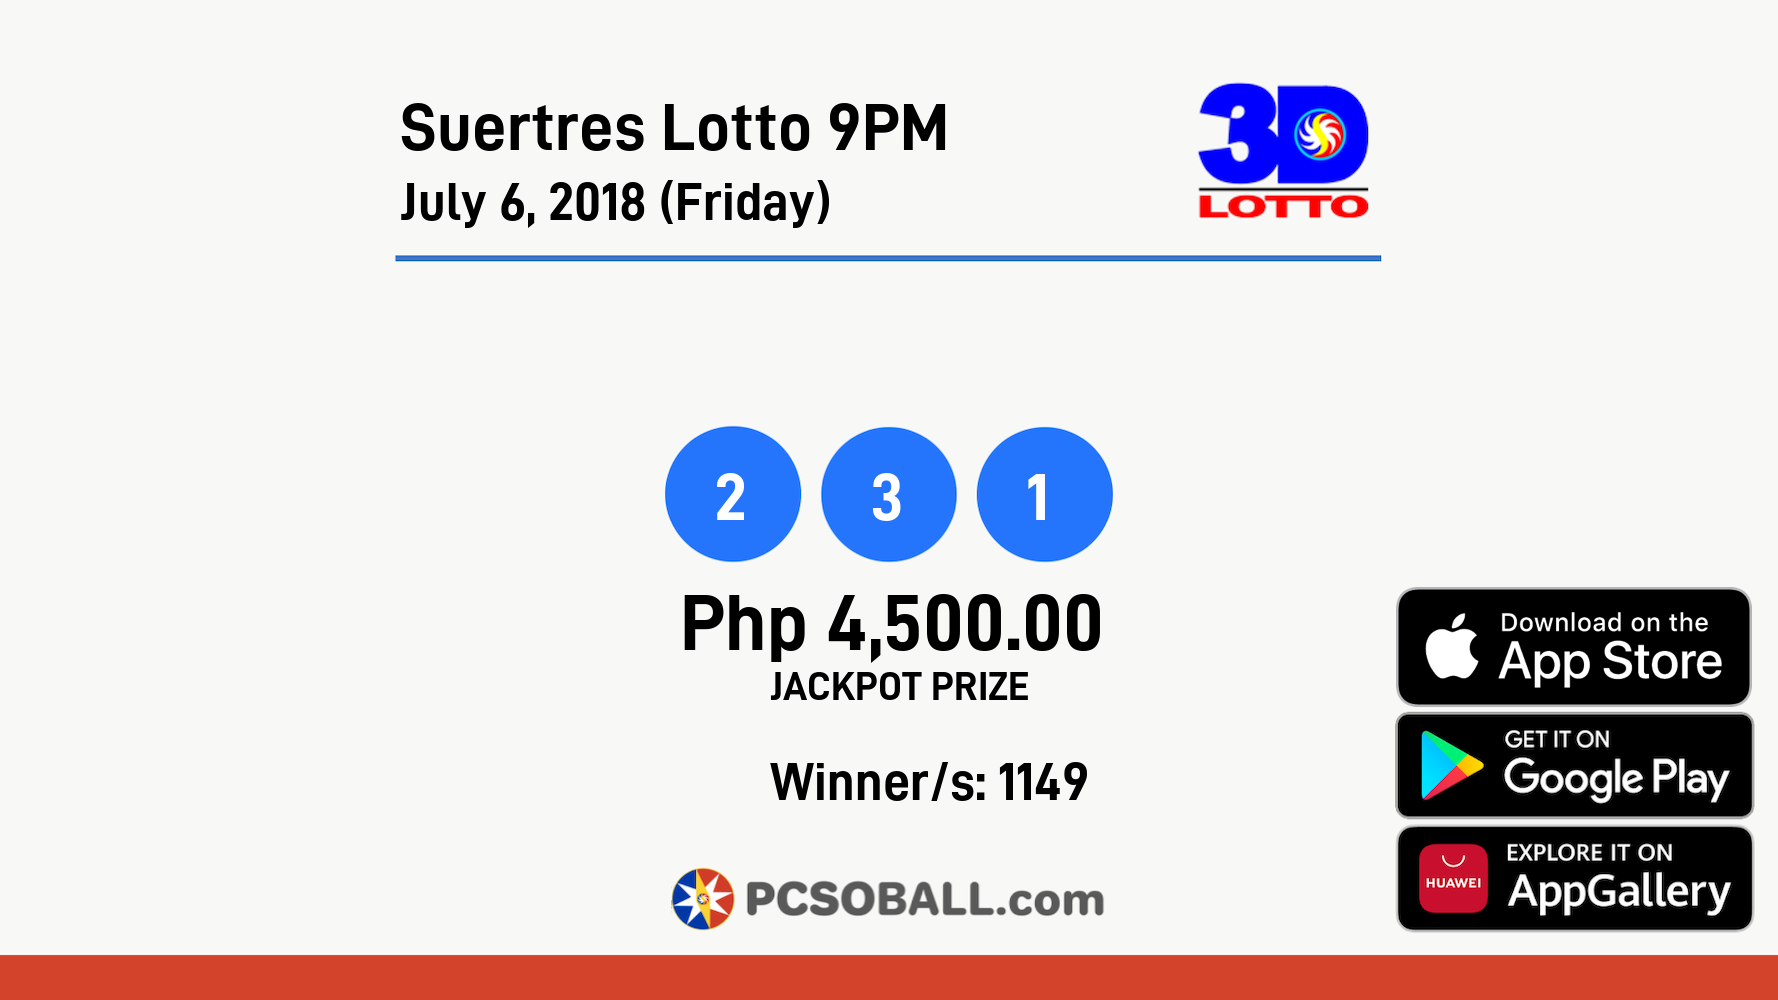 Suertres Lotto 9PM July 6, 2018 (Friday) Result